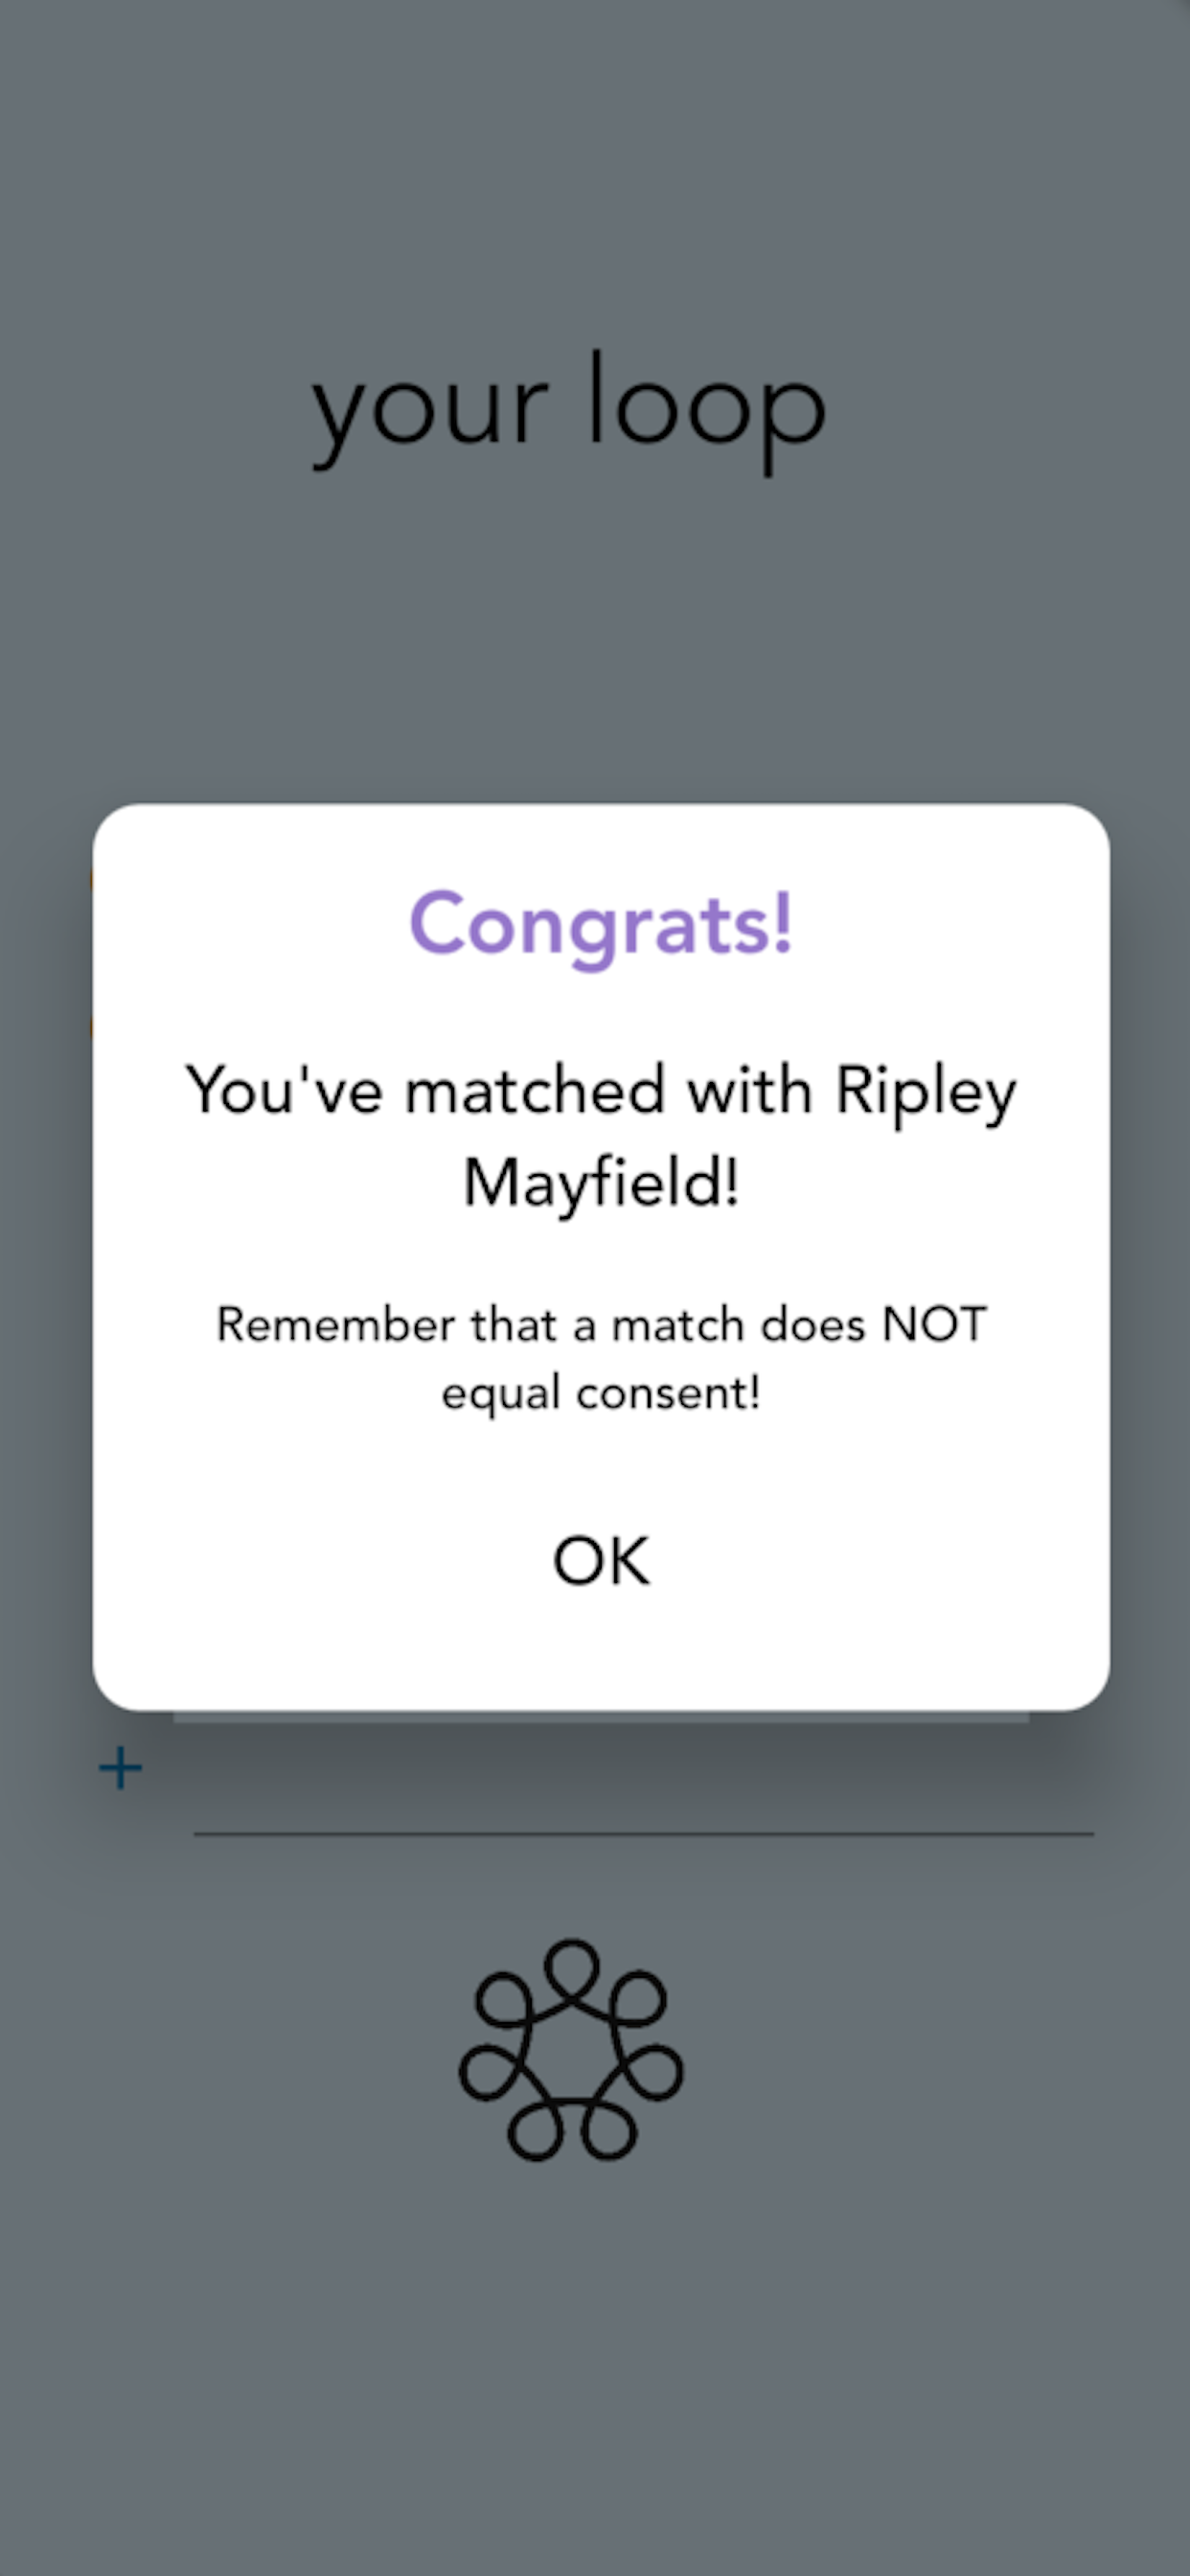 Loop notification of a match